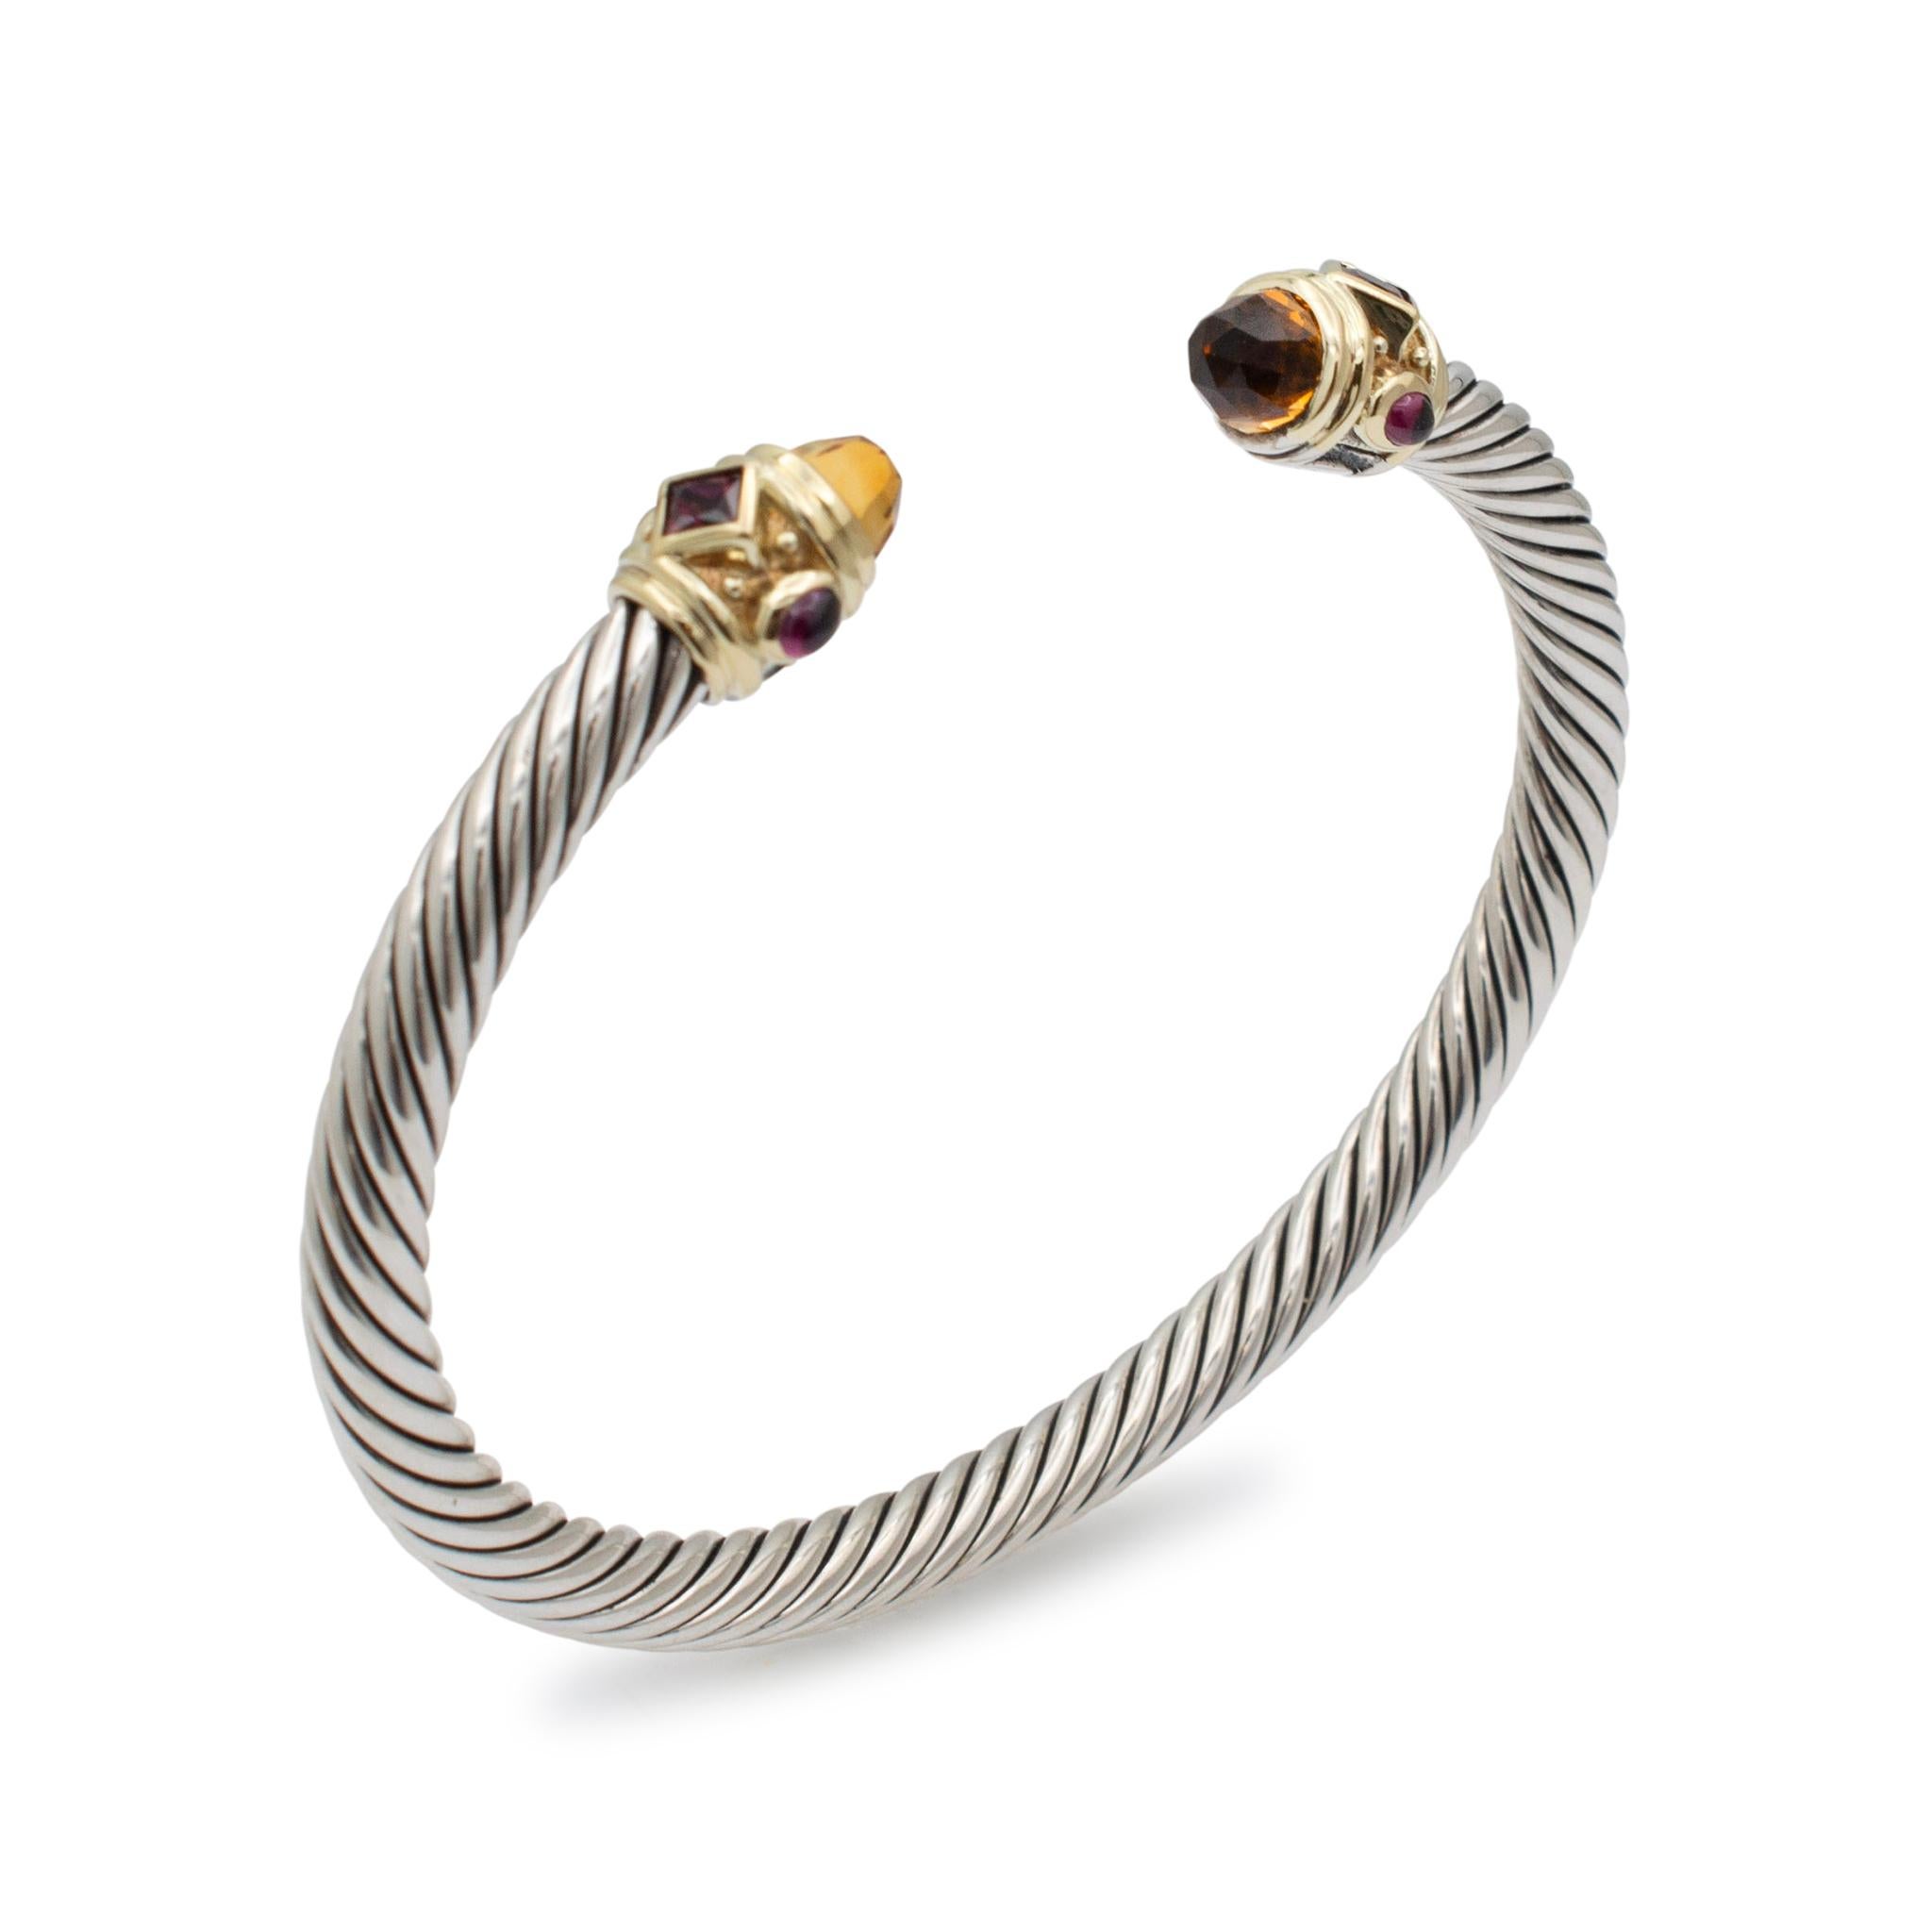 Brand: David Yurman

Gender: Ladies

Metal Type: 14K Yellow Gold & 925 Sterling Silver

Length: 6.00 Inches

Width: 5.00 mm

Weight: 29.20 grams

Ladies 14K yellow gold and silver amethyst citrine and garnet cuff bracelet. The metals were tested and